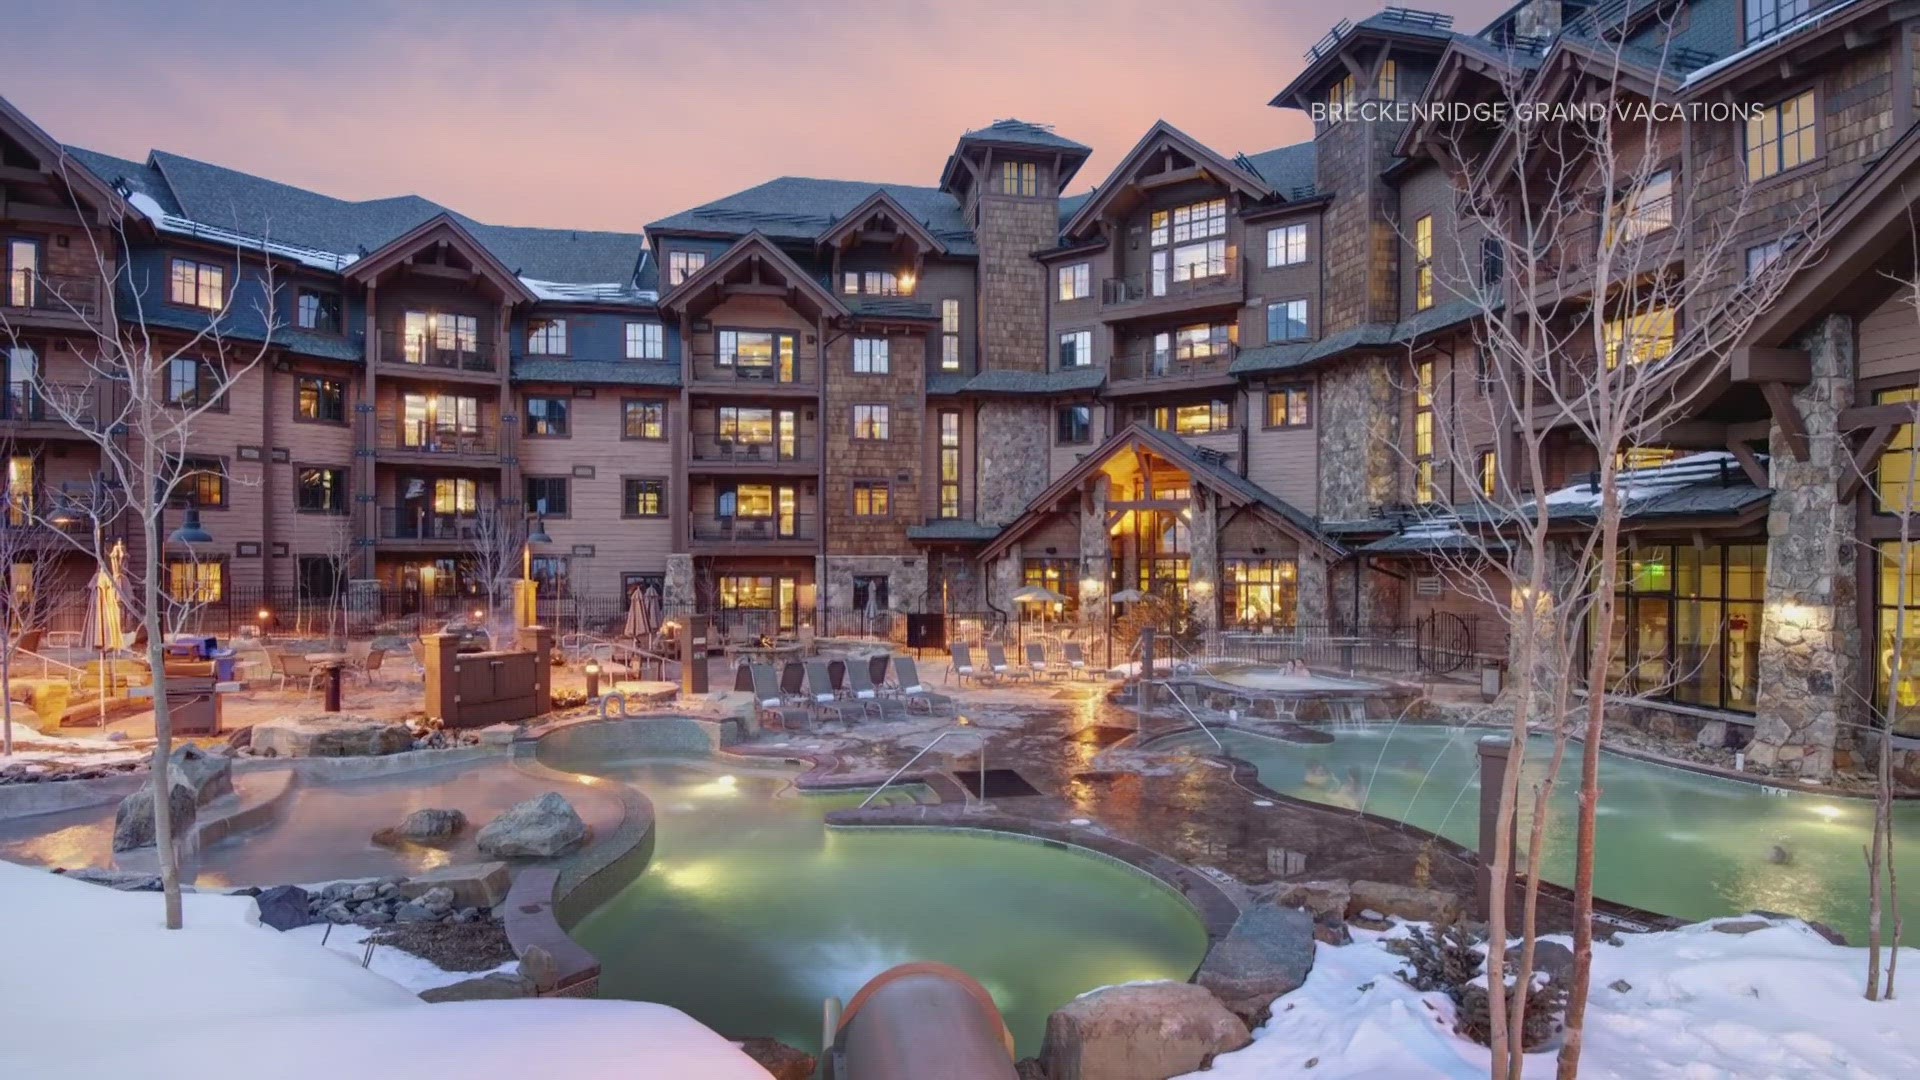 A ski lodge in Breckenridge is getting praise from the Environmental Protection Agency for their efforts to cut pack on pollution.